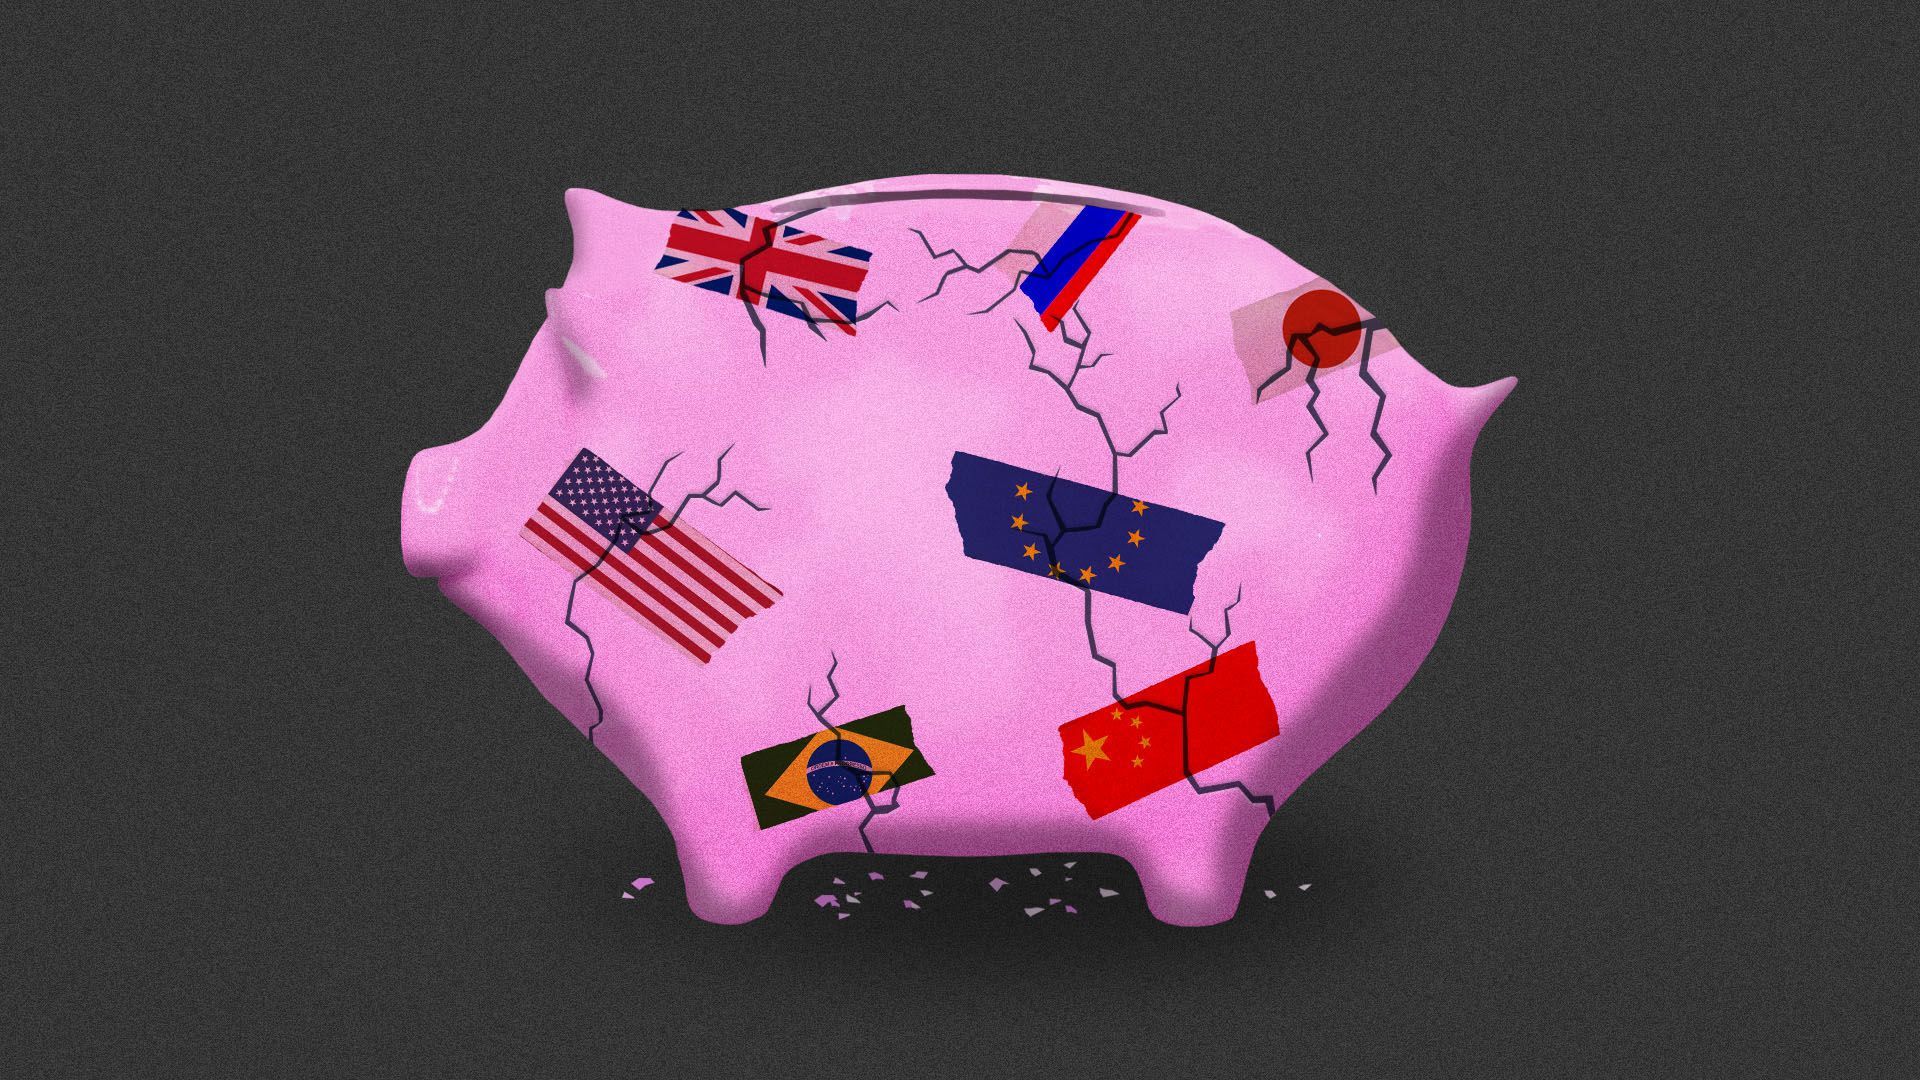 Illustration of piggy bank cracking held together by countries' flags